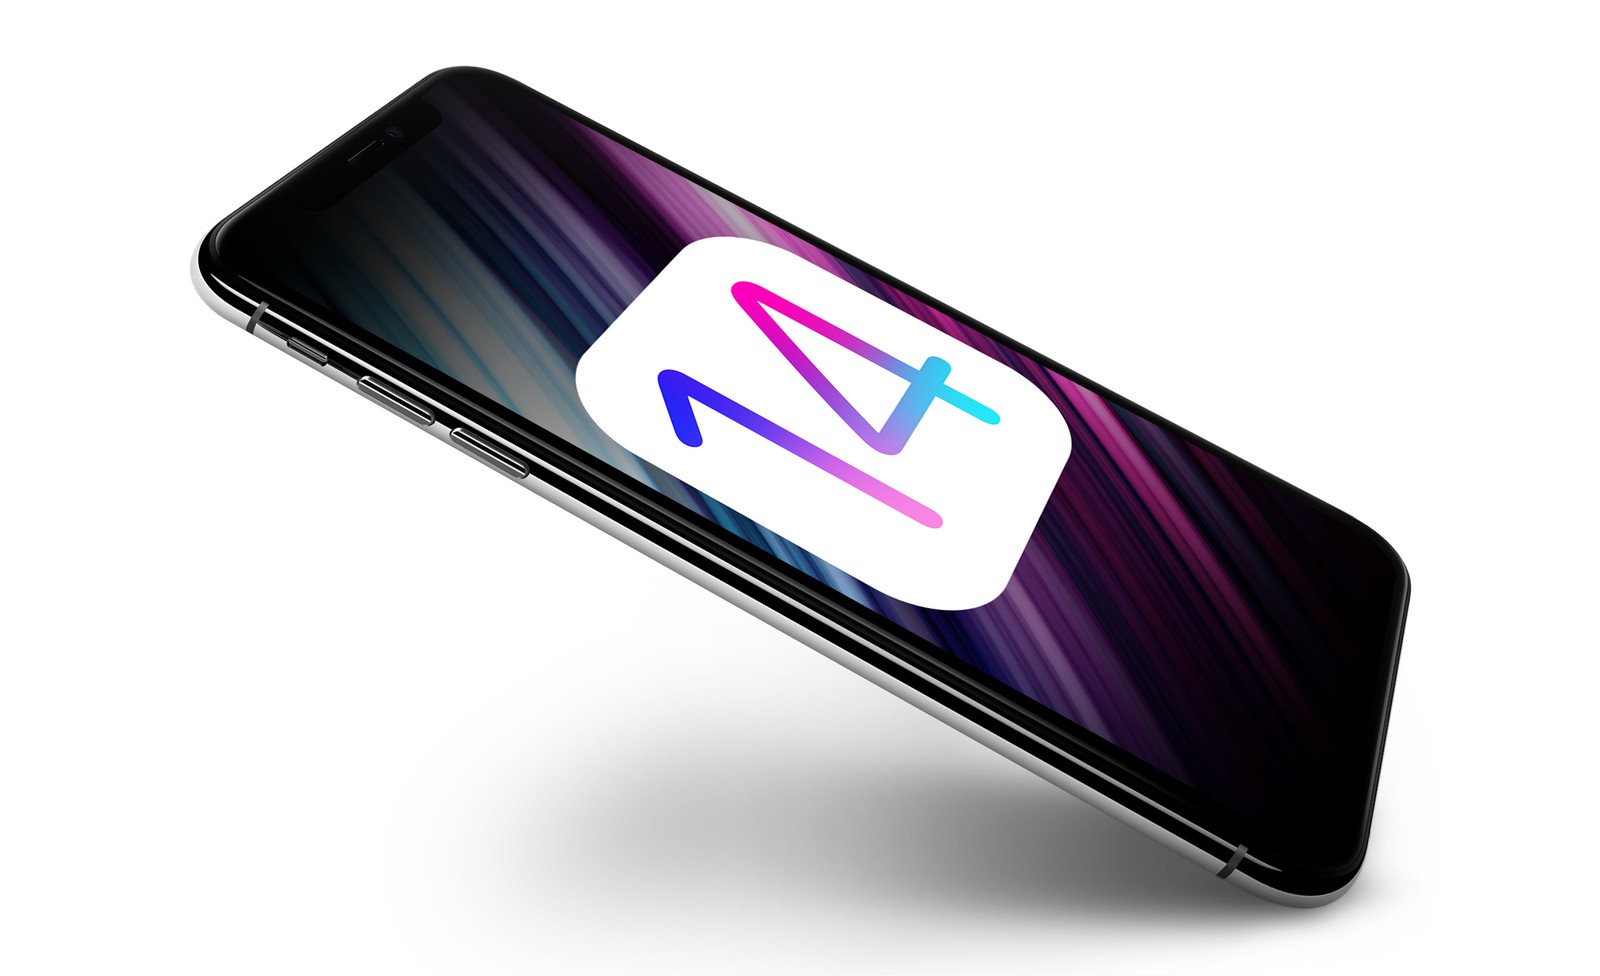 IOS 14 major leaks and upcoming features